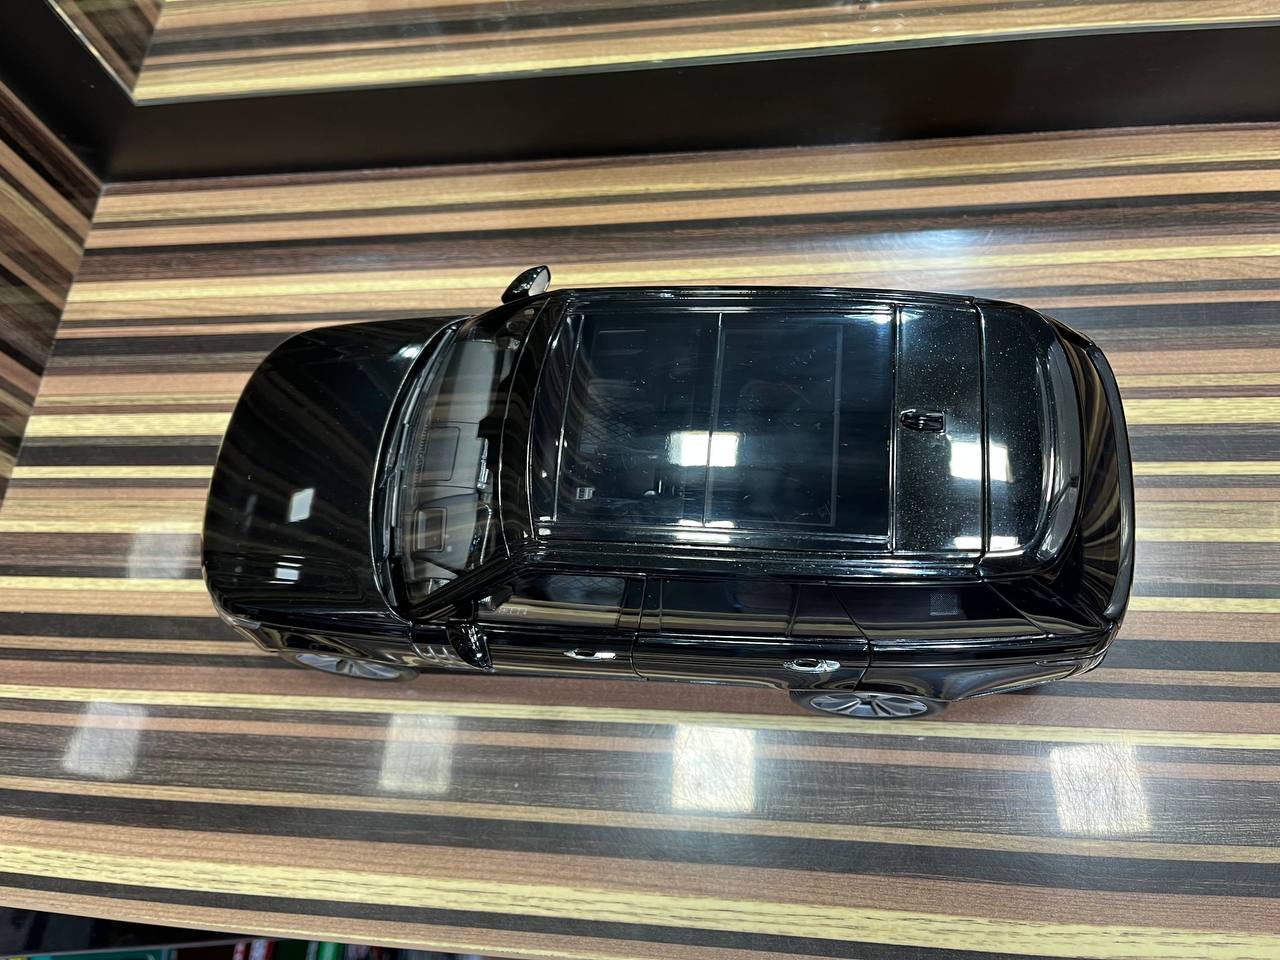 LCD Land Rover Range Rover - 1/18 Diecast Model, All Opening - Black